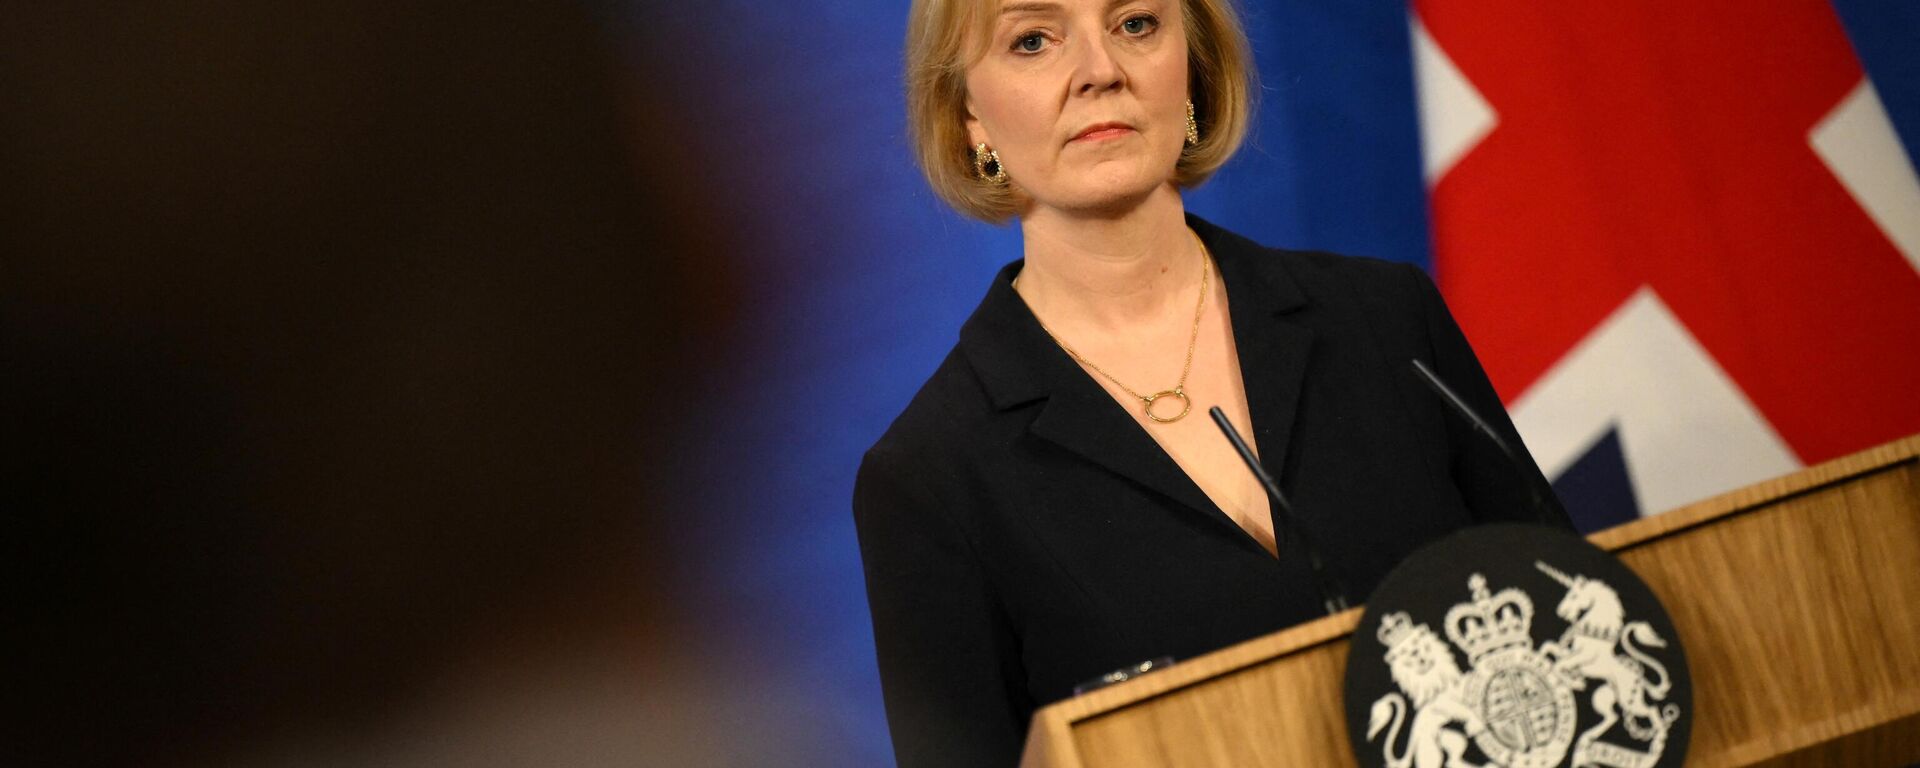 Britain's Prime Minister Liz Truss holds a press conference in the Downing Street Briefing Room in central London on October 14, 2022. - Sputnik International, 1920, 25.10.2022